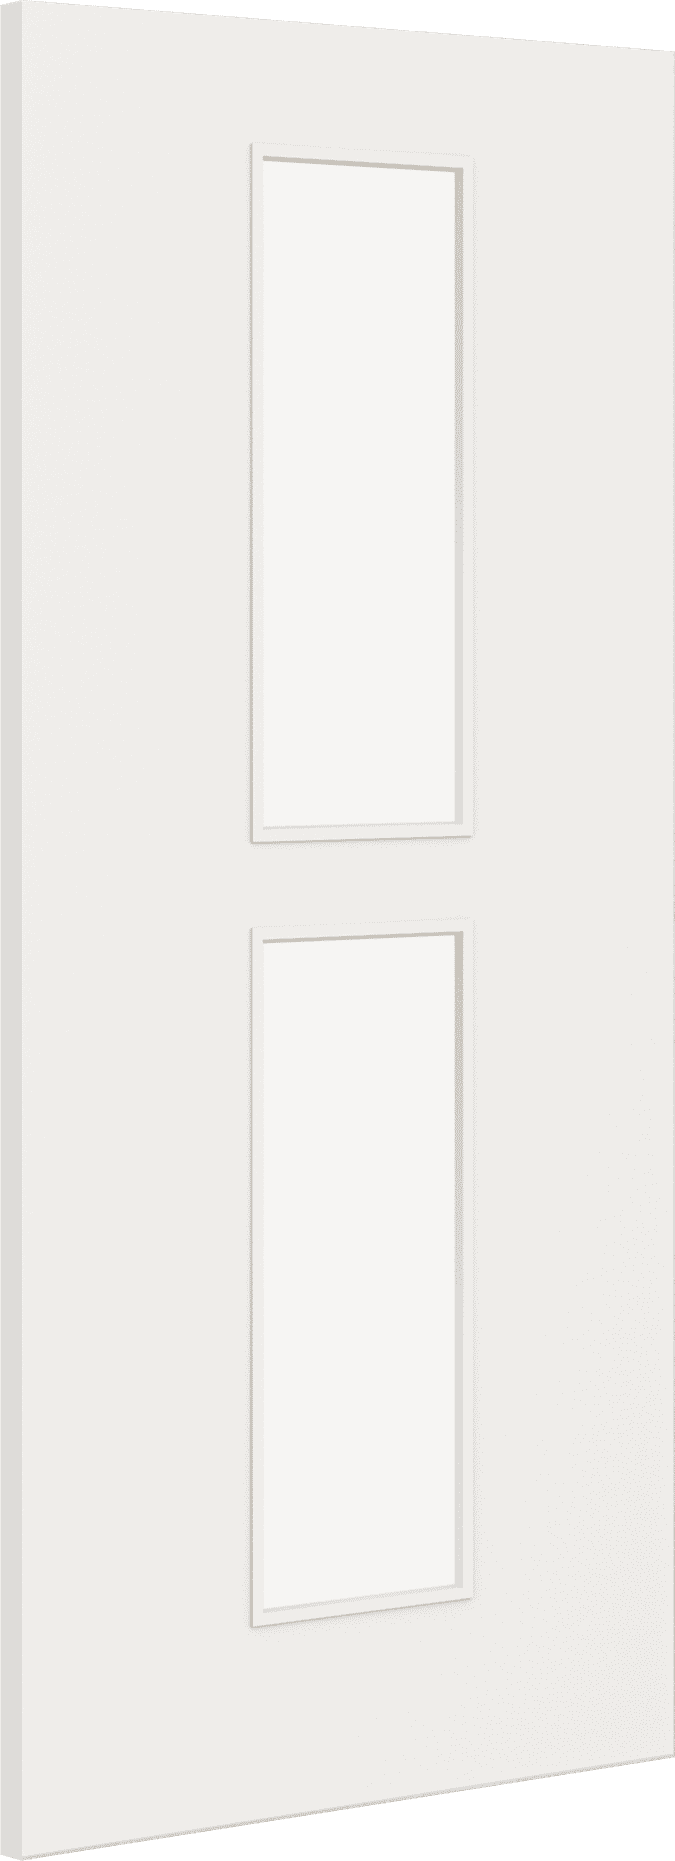 2040mm x 826mm x 44mm Architectural Paint Grade White 12 Frosted Glazed Fire Door Blank